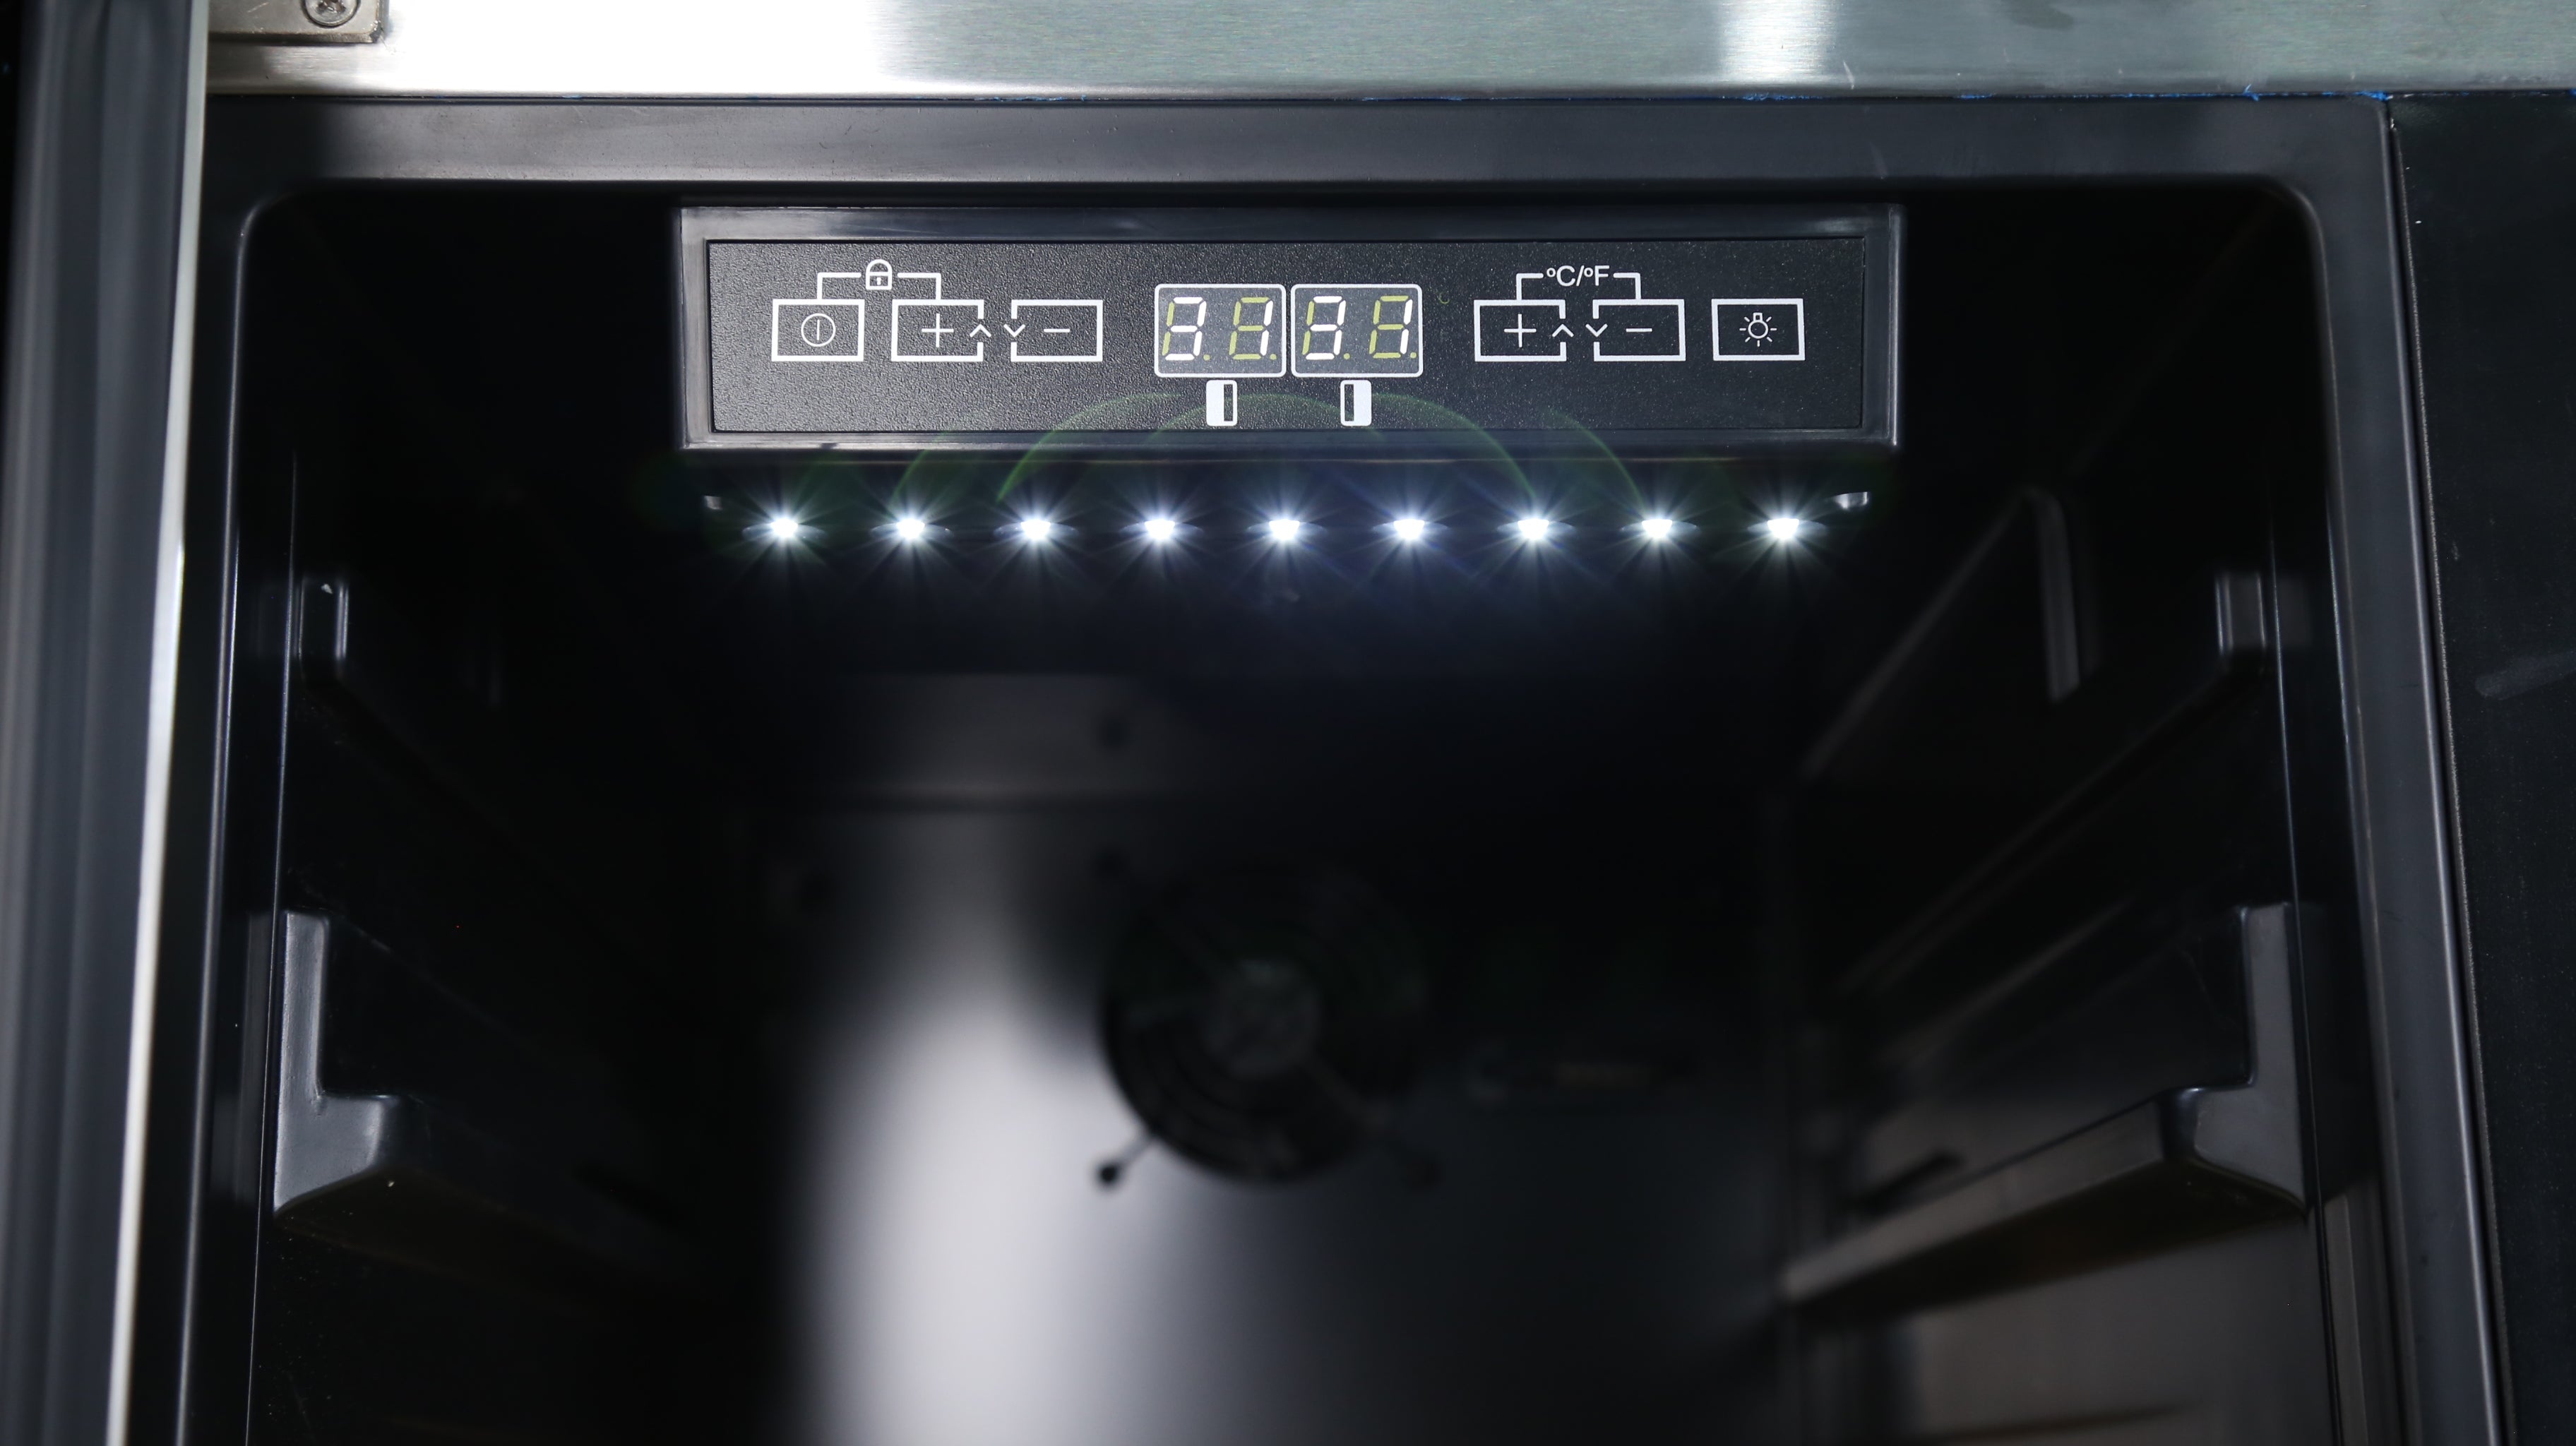 Close-up view of the interior space of a 6.3 Cu Ft Wine Outdoor Refrigerator With Single Tap Kegerator, focusing on the digital temperature control panel